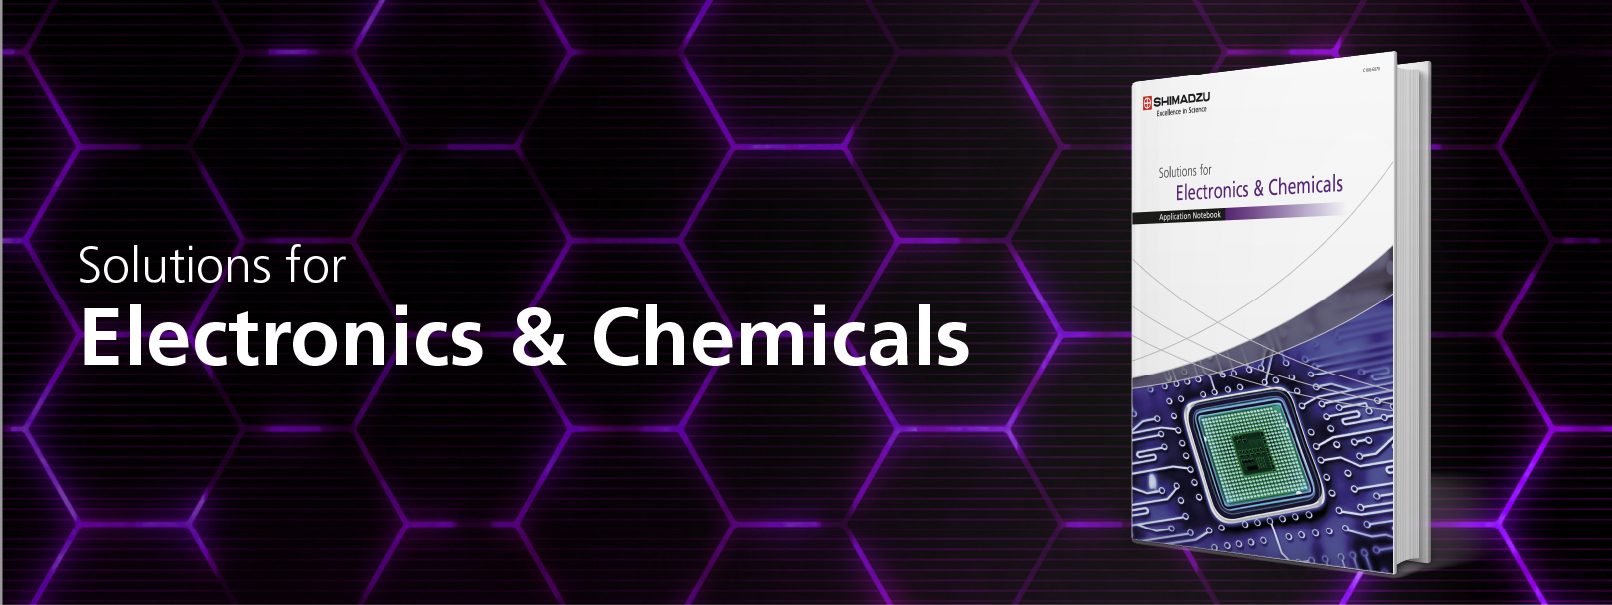 Solutions for Electronics & Chemicals